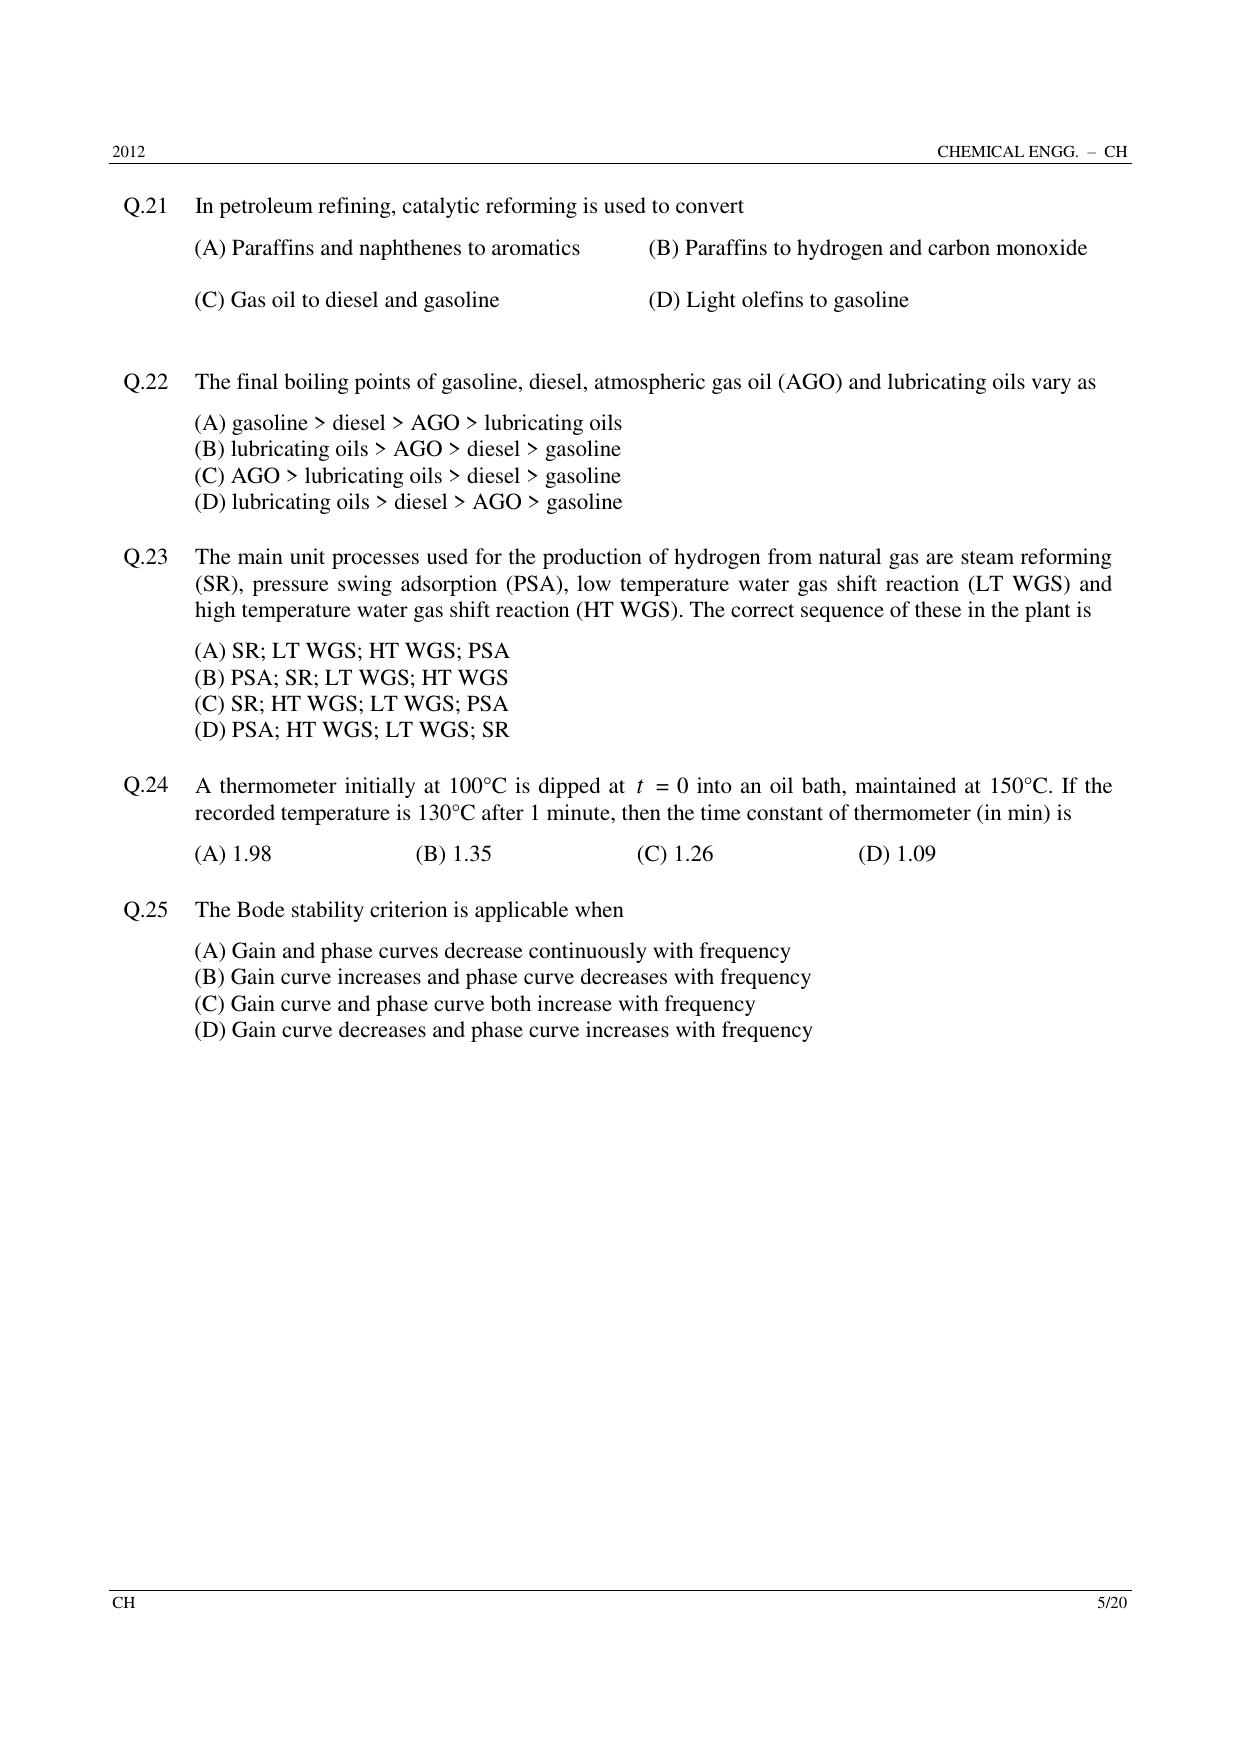 GATE 2012 Chemical Engineering (CH) Question Paper with Answer Key - Page 5